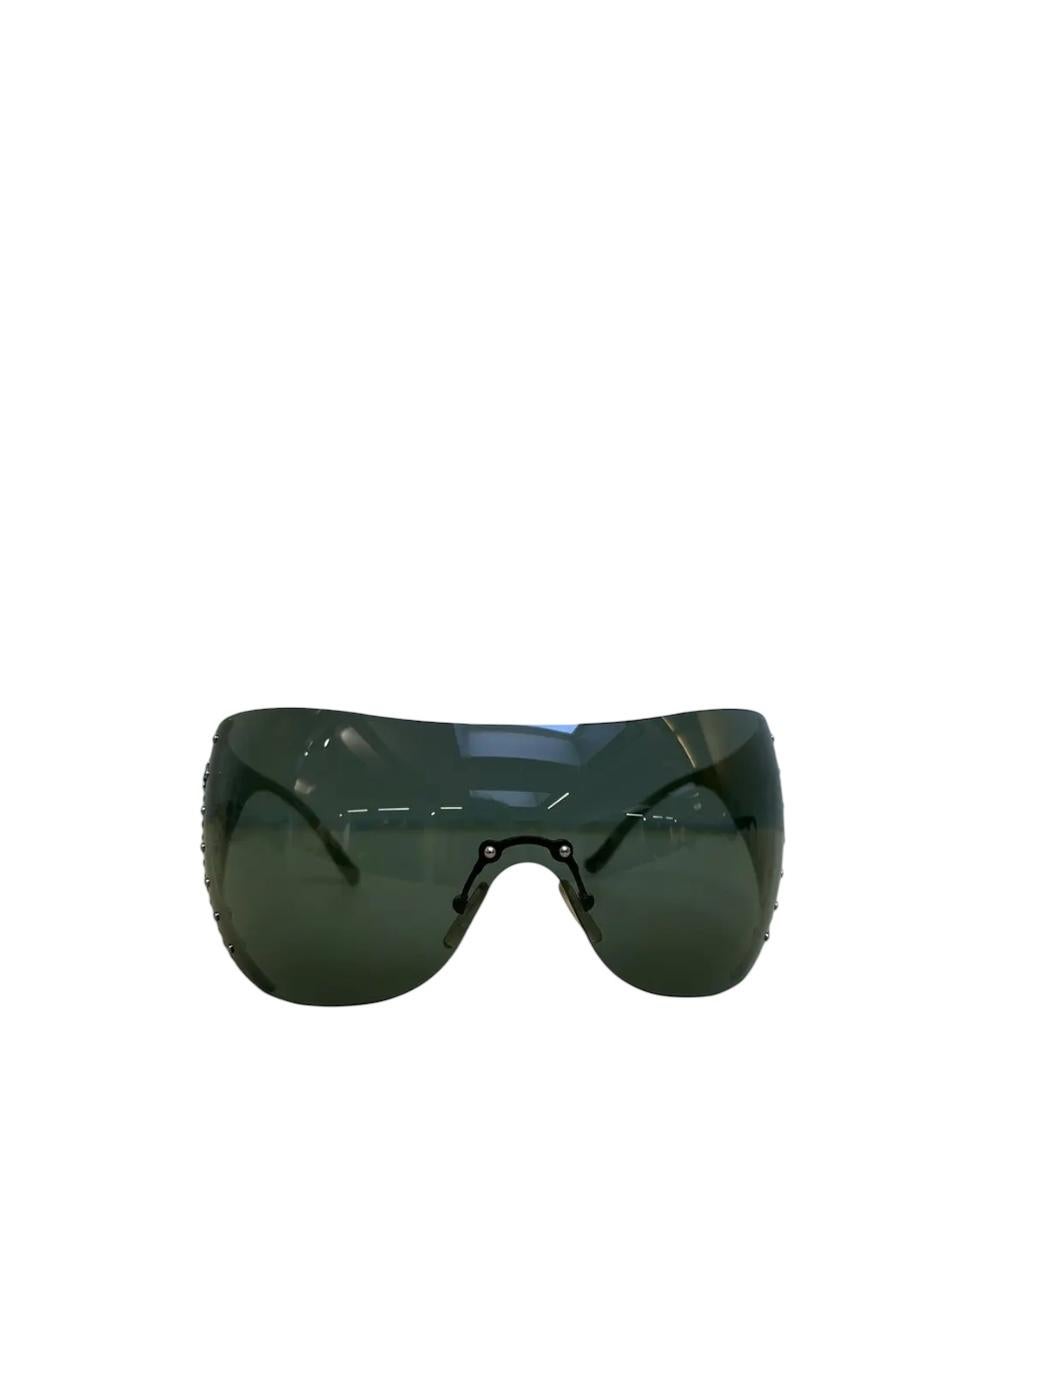 Dior
Bike 1 Green Oversized Mask Sunglasses

Beautiful Dior Bike 1 oversized mask sunglasses. In great condition without flaws, features the original case and band to hang around your neck.